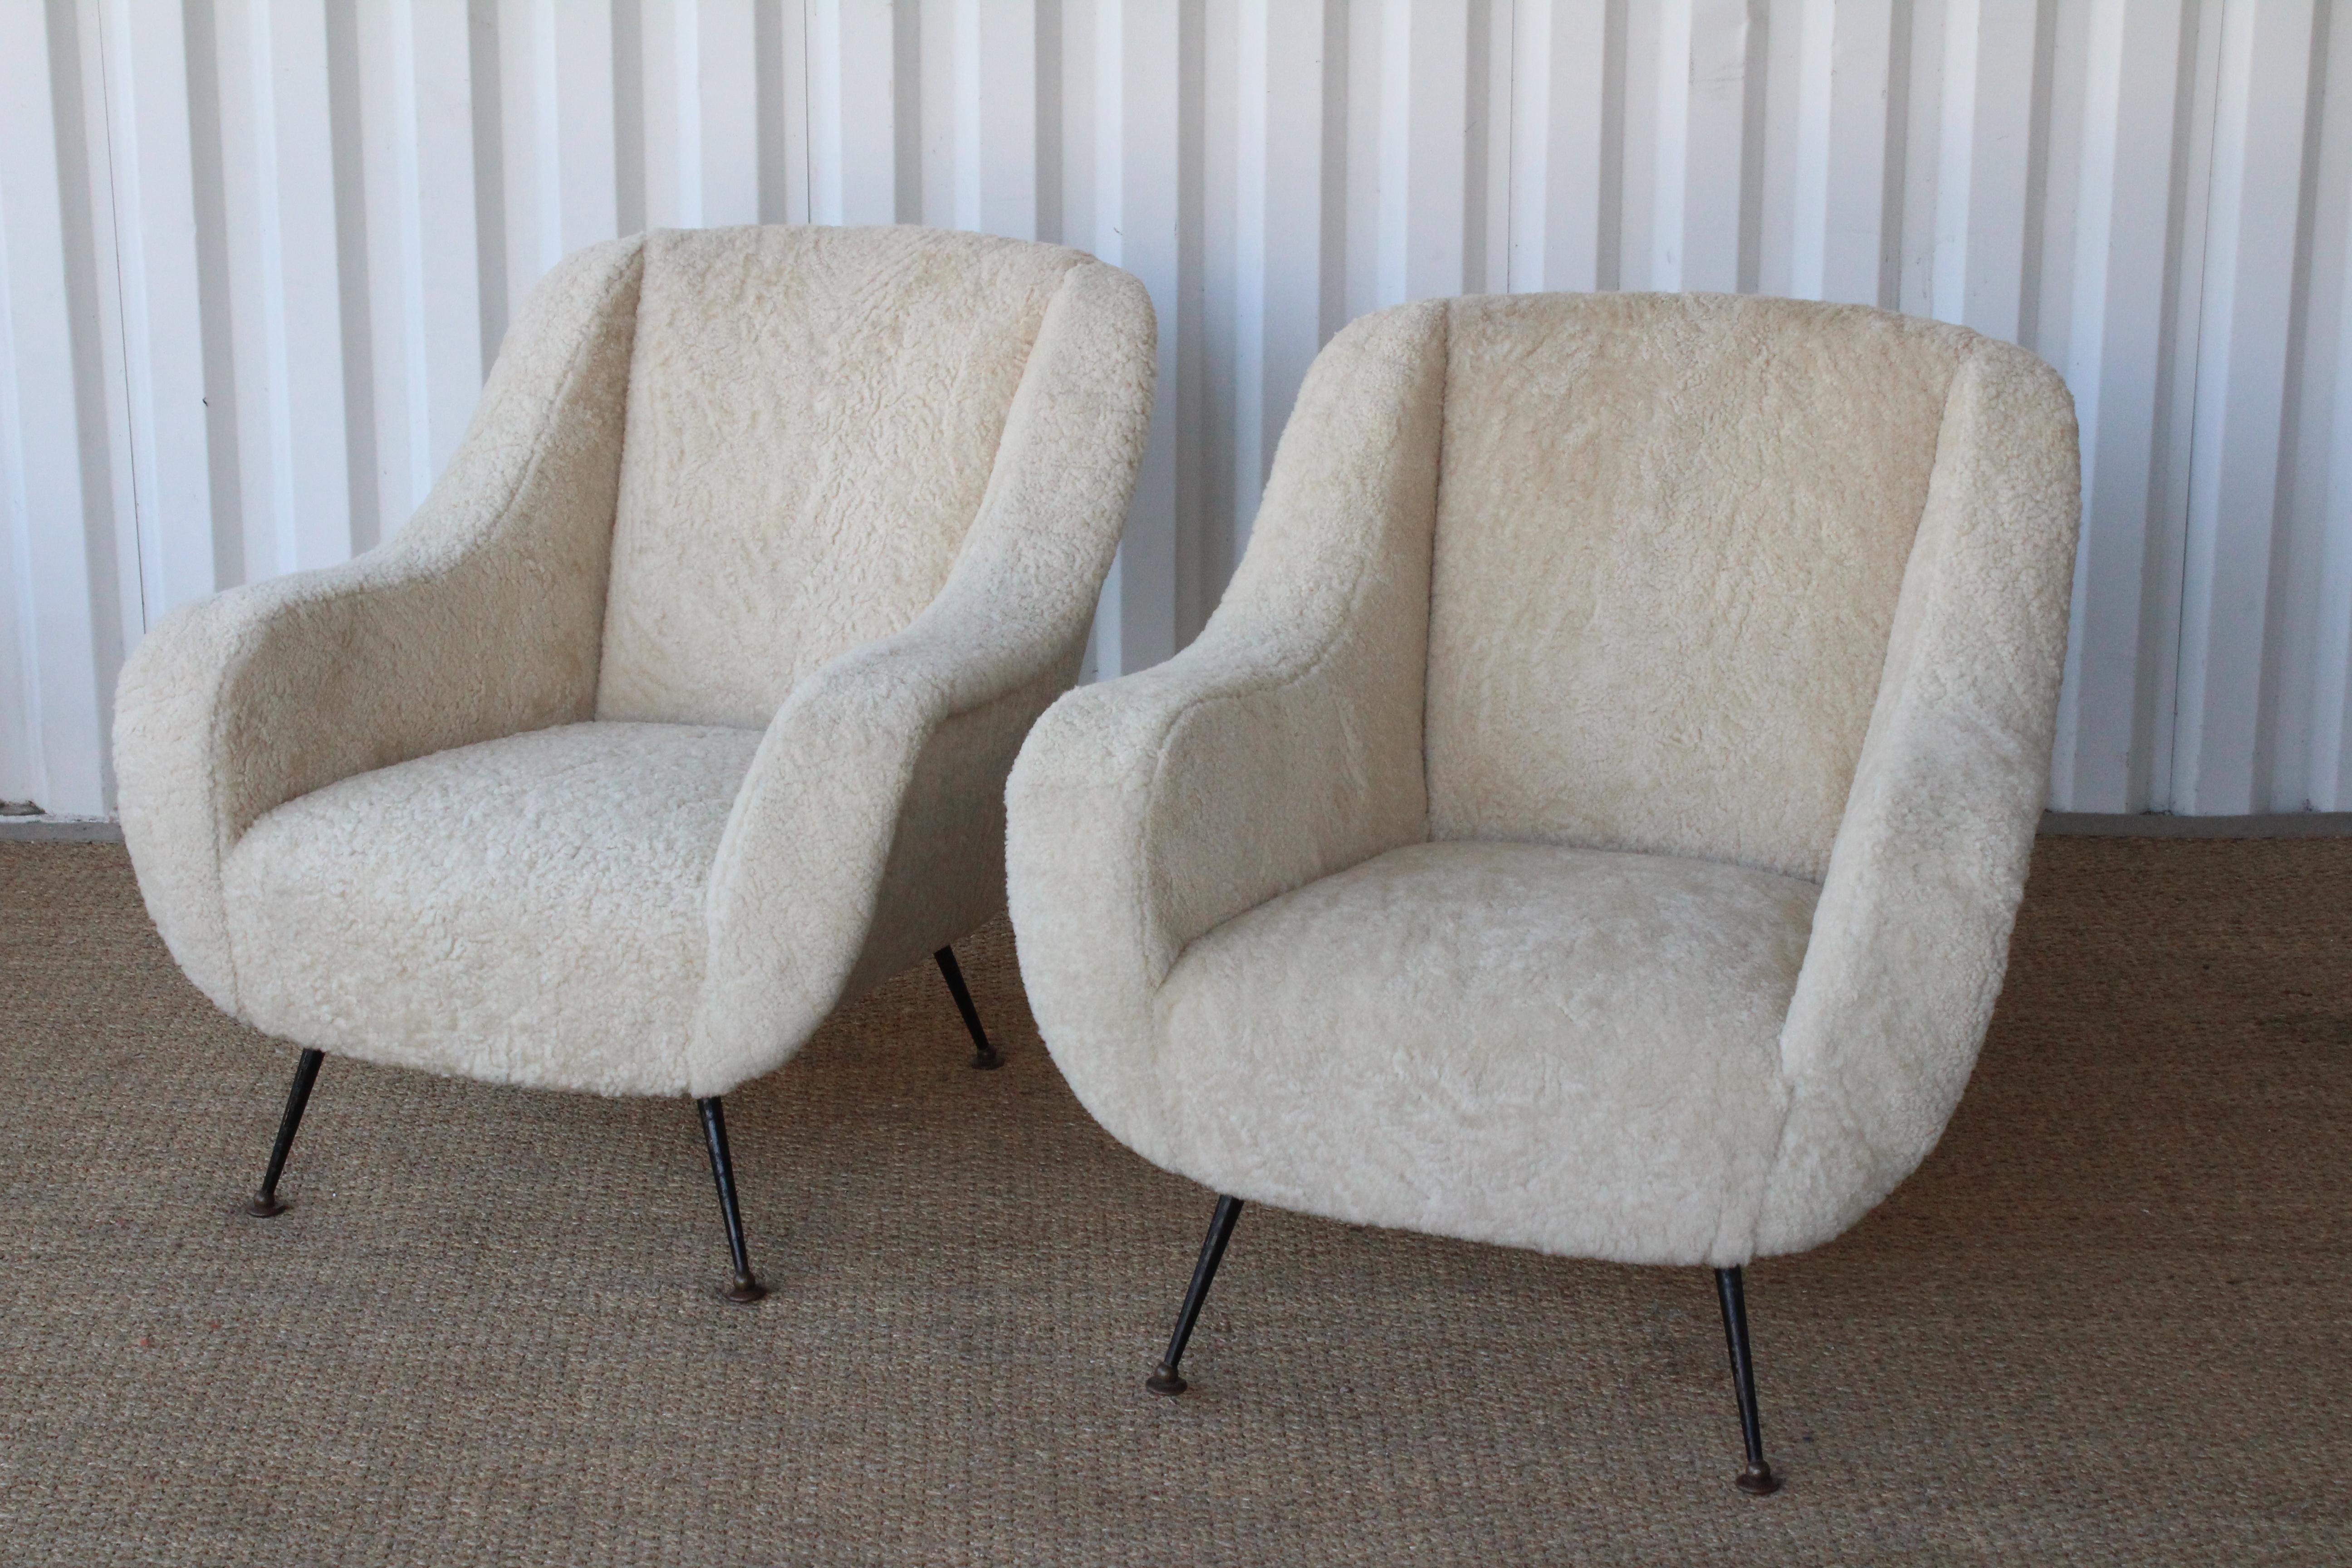 Mid-20th Century Pair of Mid Century Lounge Chairs in Sheepskin, Italy, 1950s